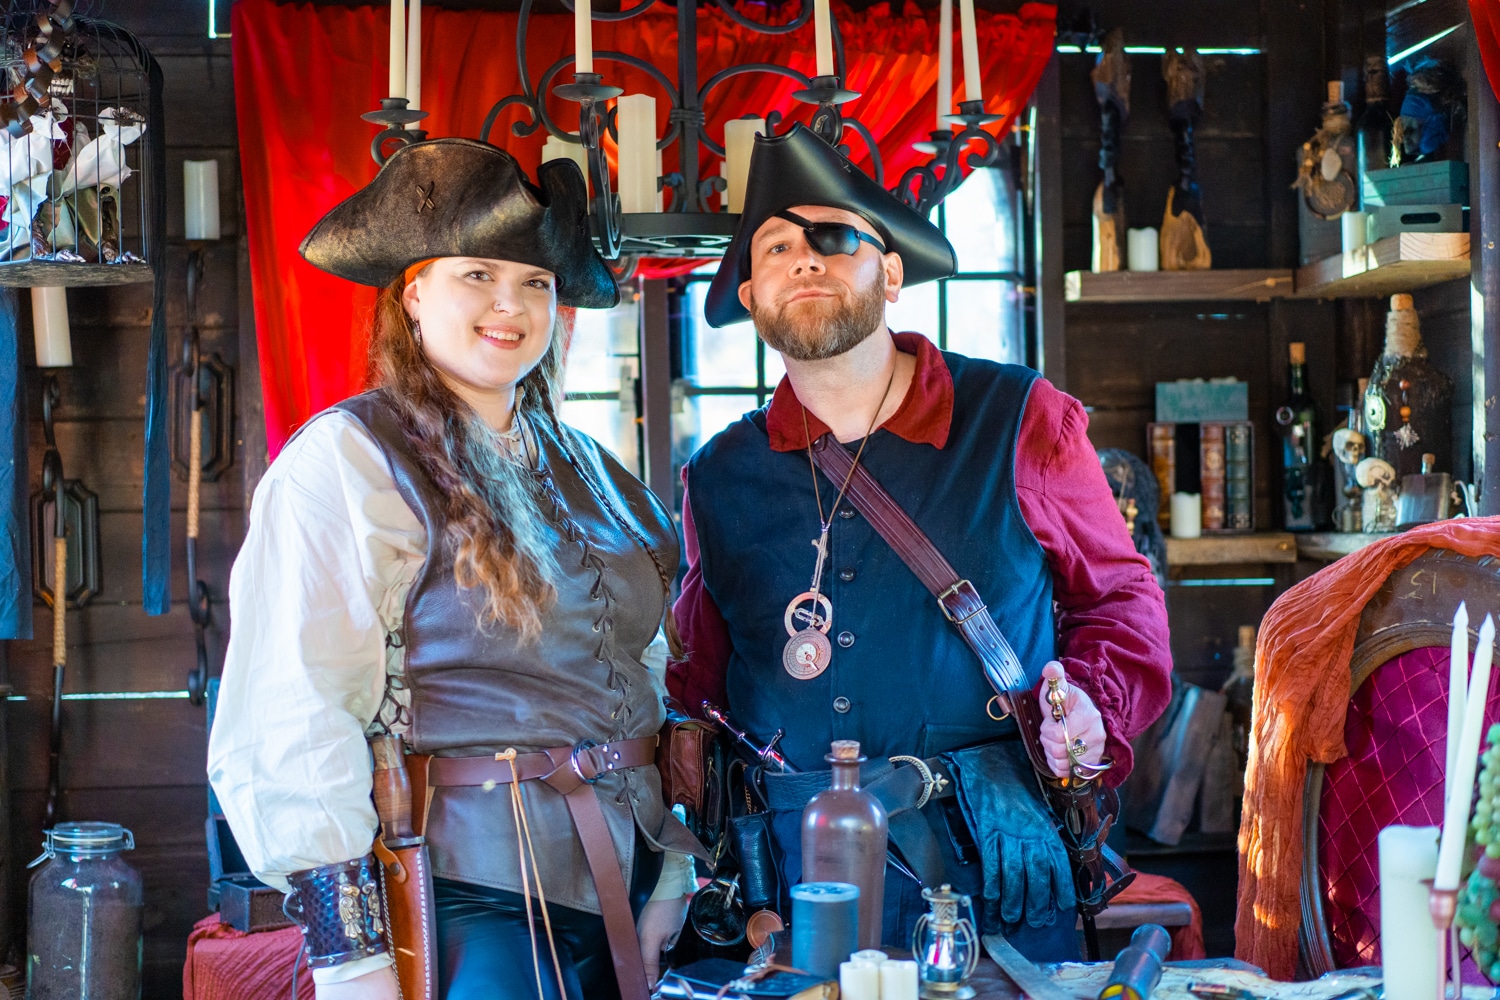 A man and woman dressed as pirates smile for the camera in a shop at the Arkansas Renaissance Festival.